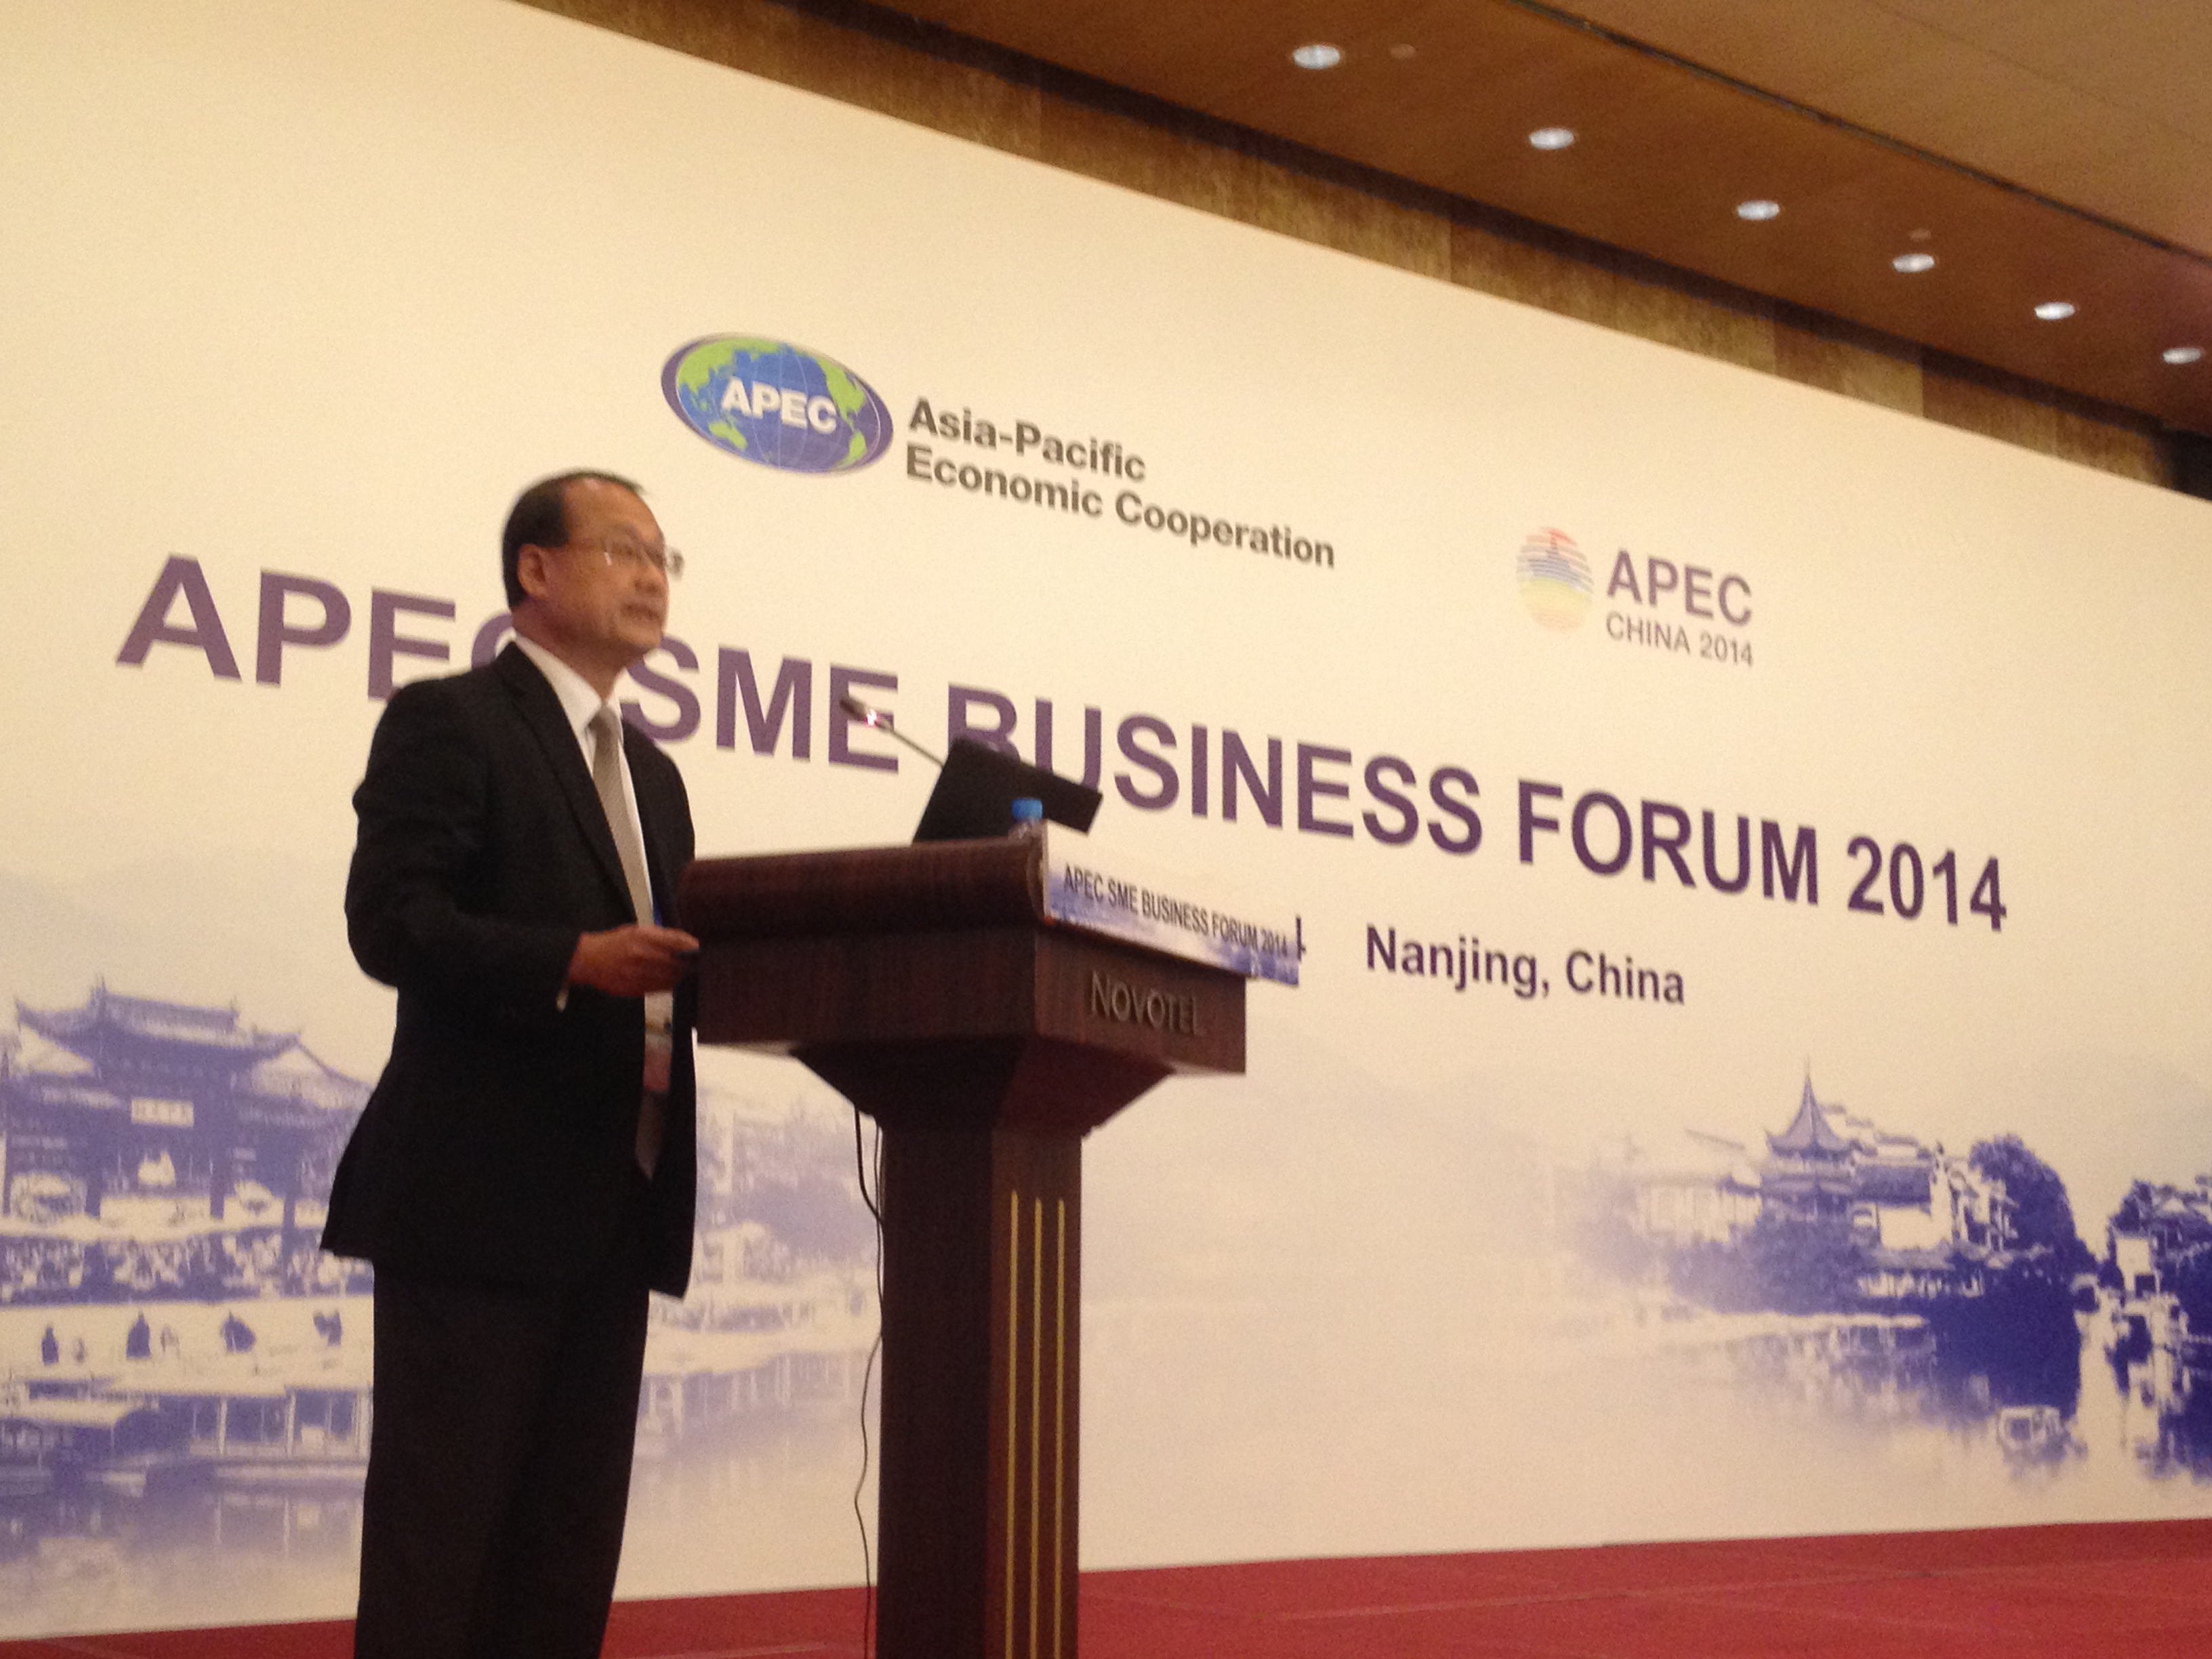 Photo 6 : Dr Jonathan Choi Koon-shum, GBS, JP, Chairman of the Small and Medium Enterprises Committee, attended the APEC SME Business Forum 2014 held in Nanjing on 2 September 2014 as a keynote speaker.